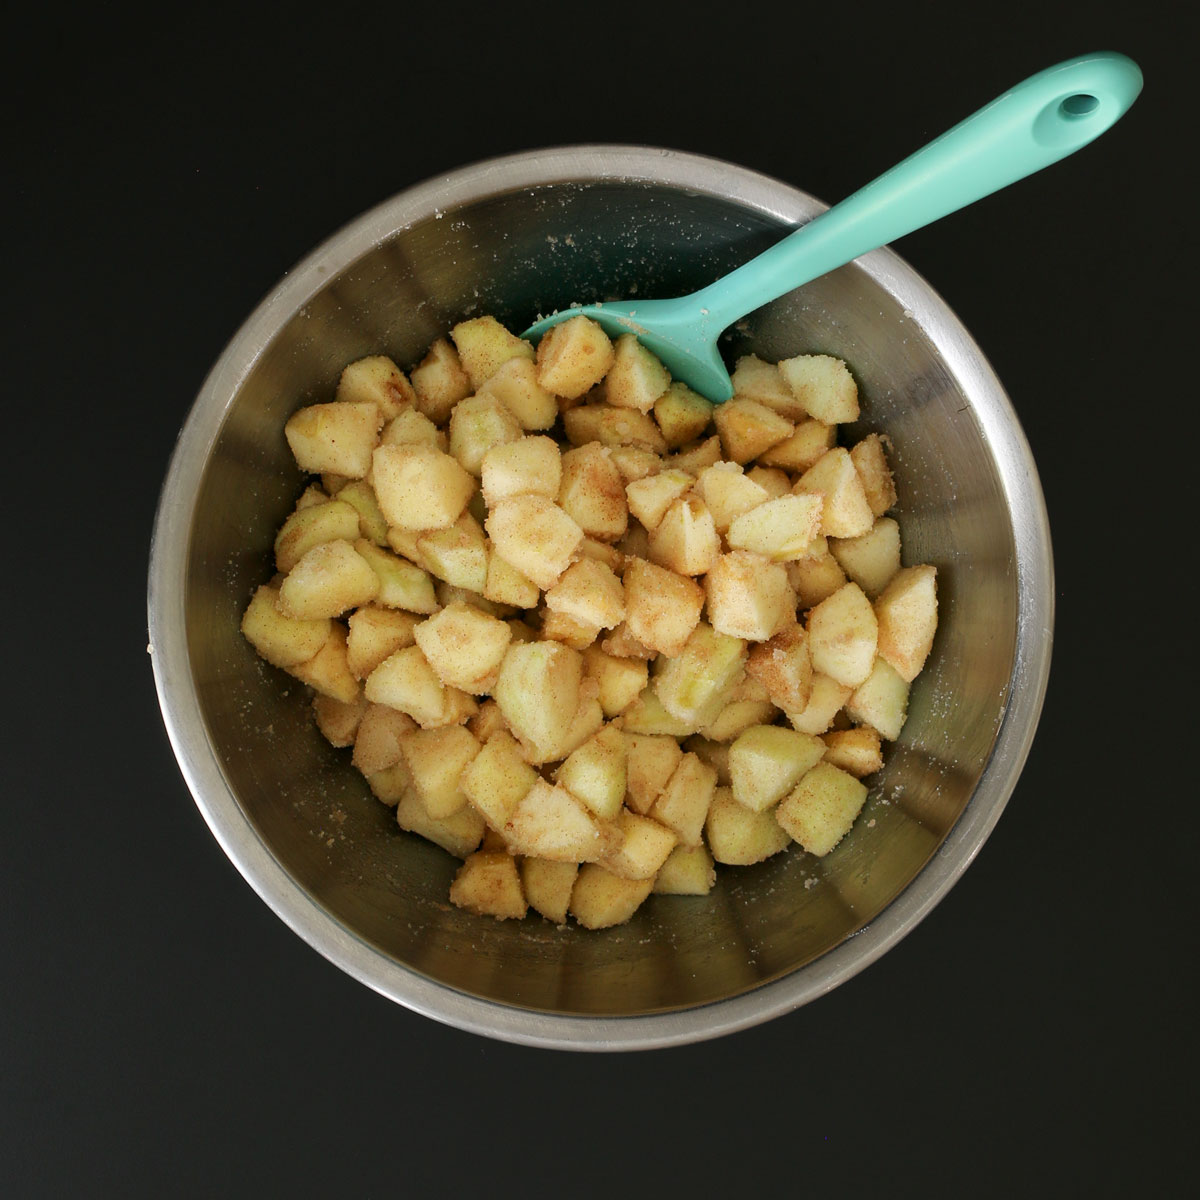 teal spatula immersed in bowl of apple mixture.